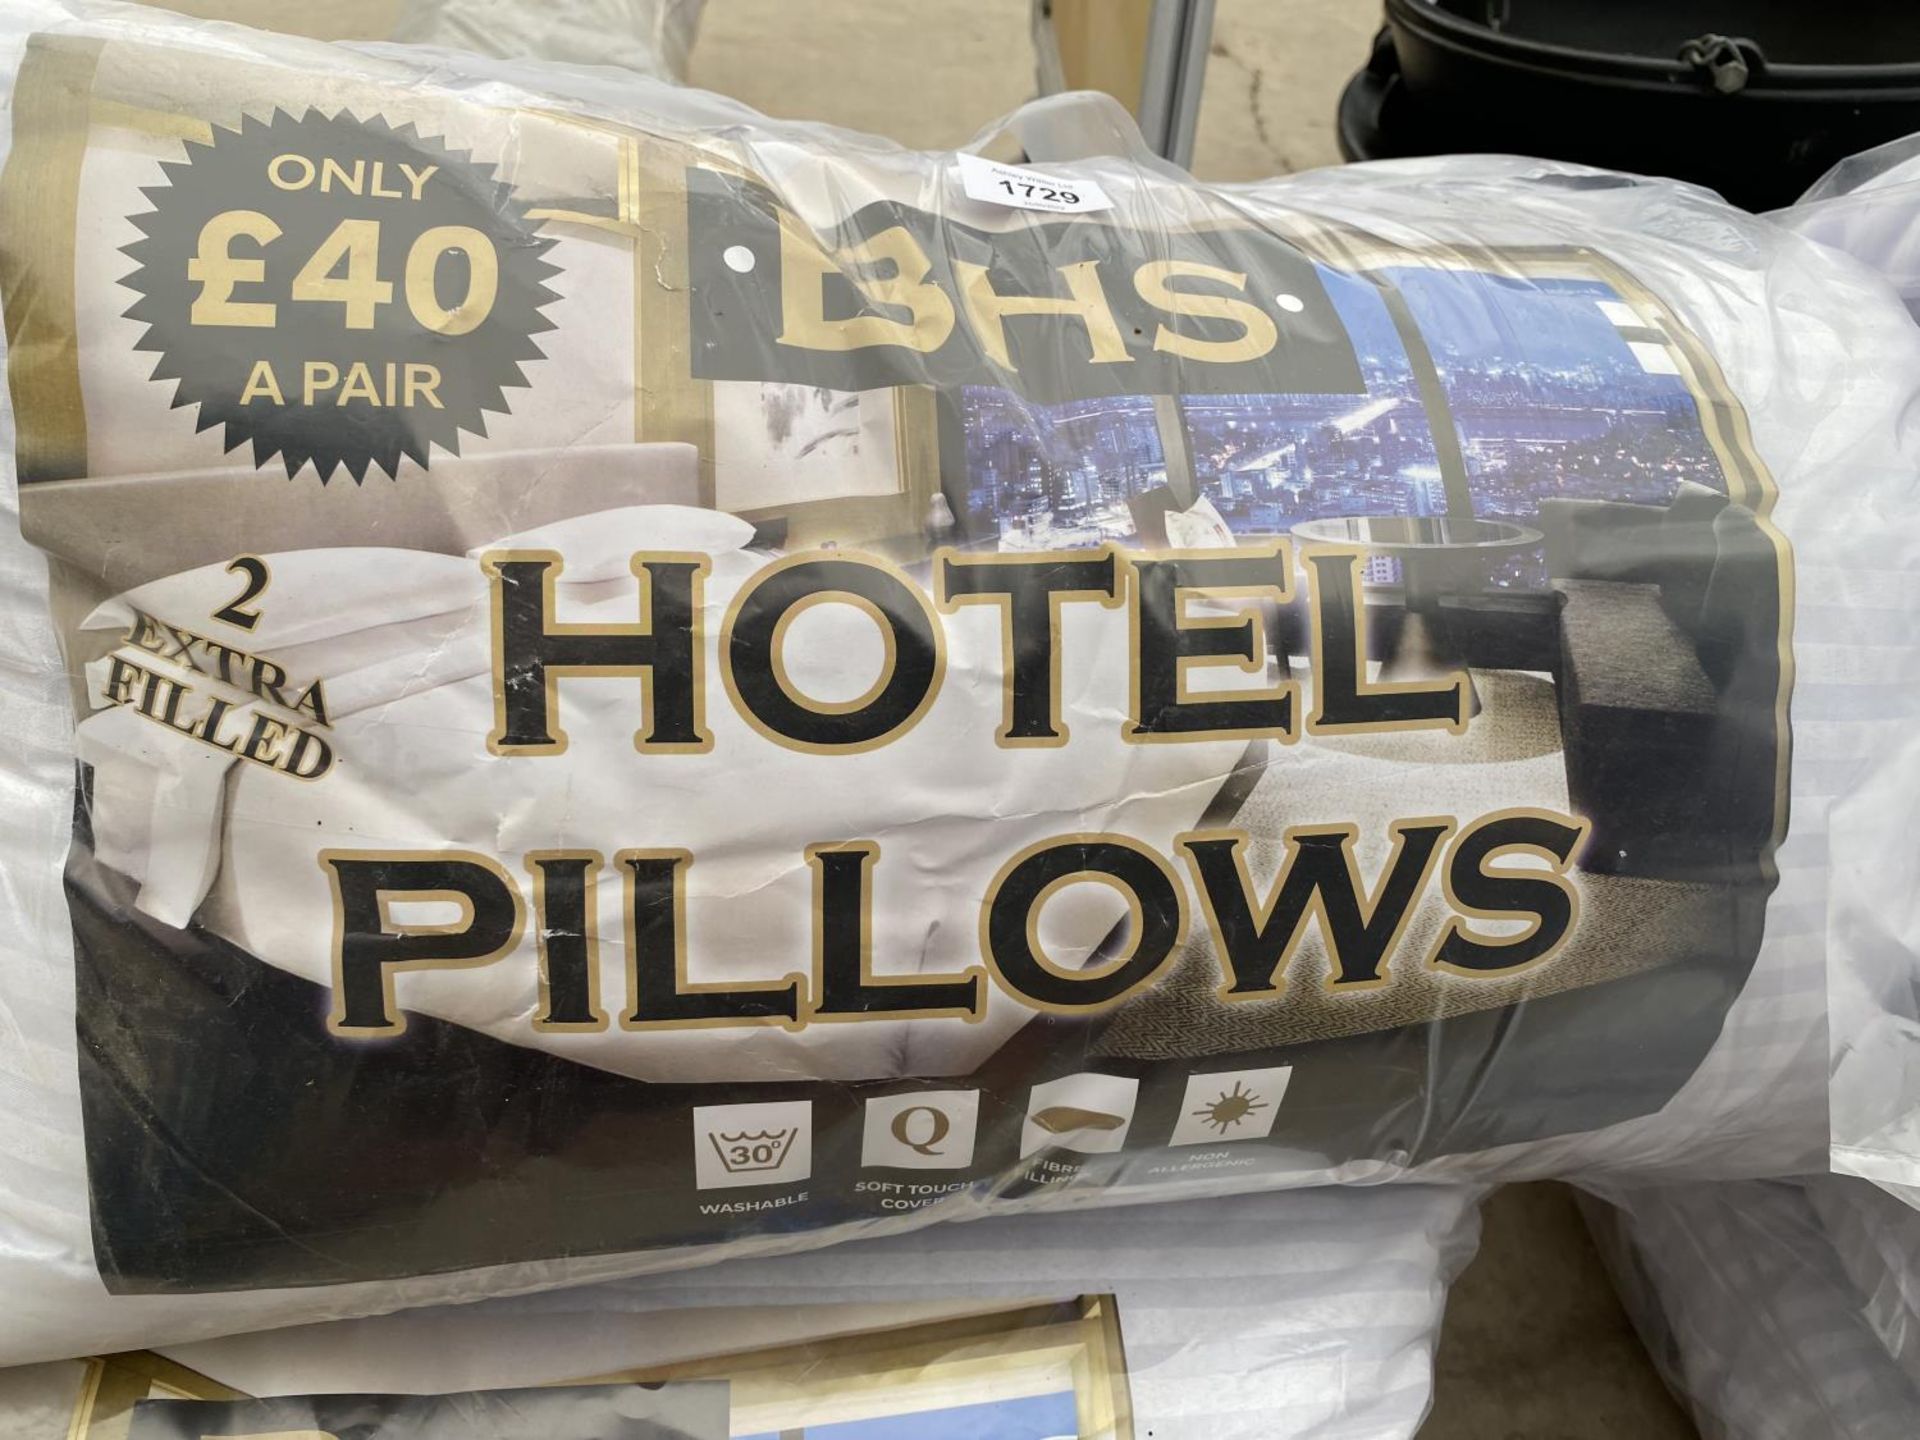 SIX AS NEW BHS HOTEL PILLOWS - Image 4 of 6